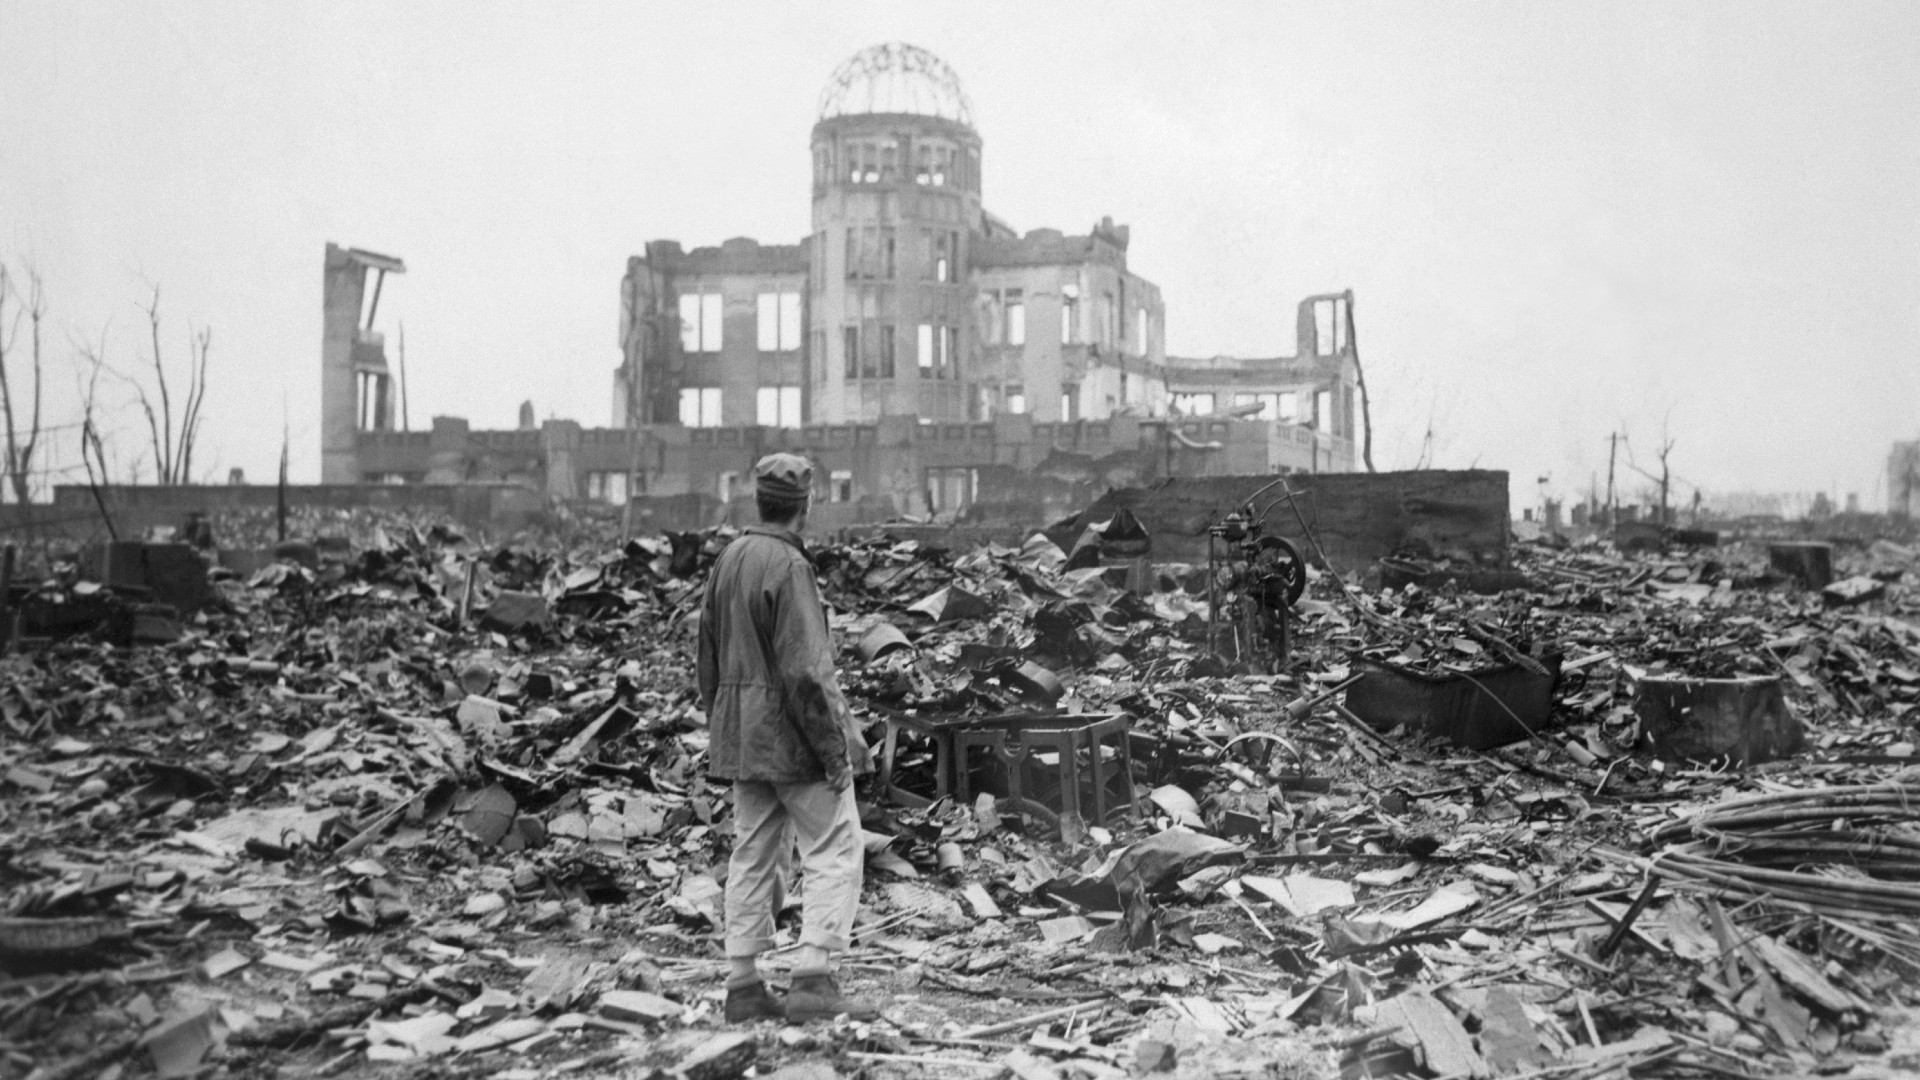 The damage caused by the Hiroshima bombing